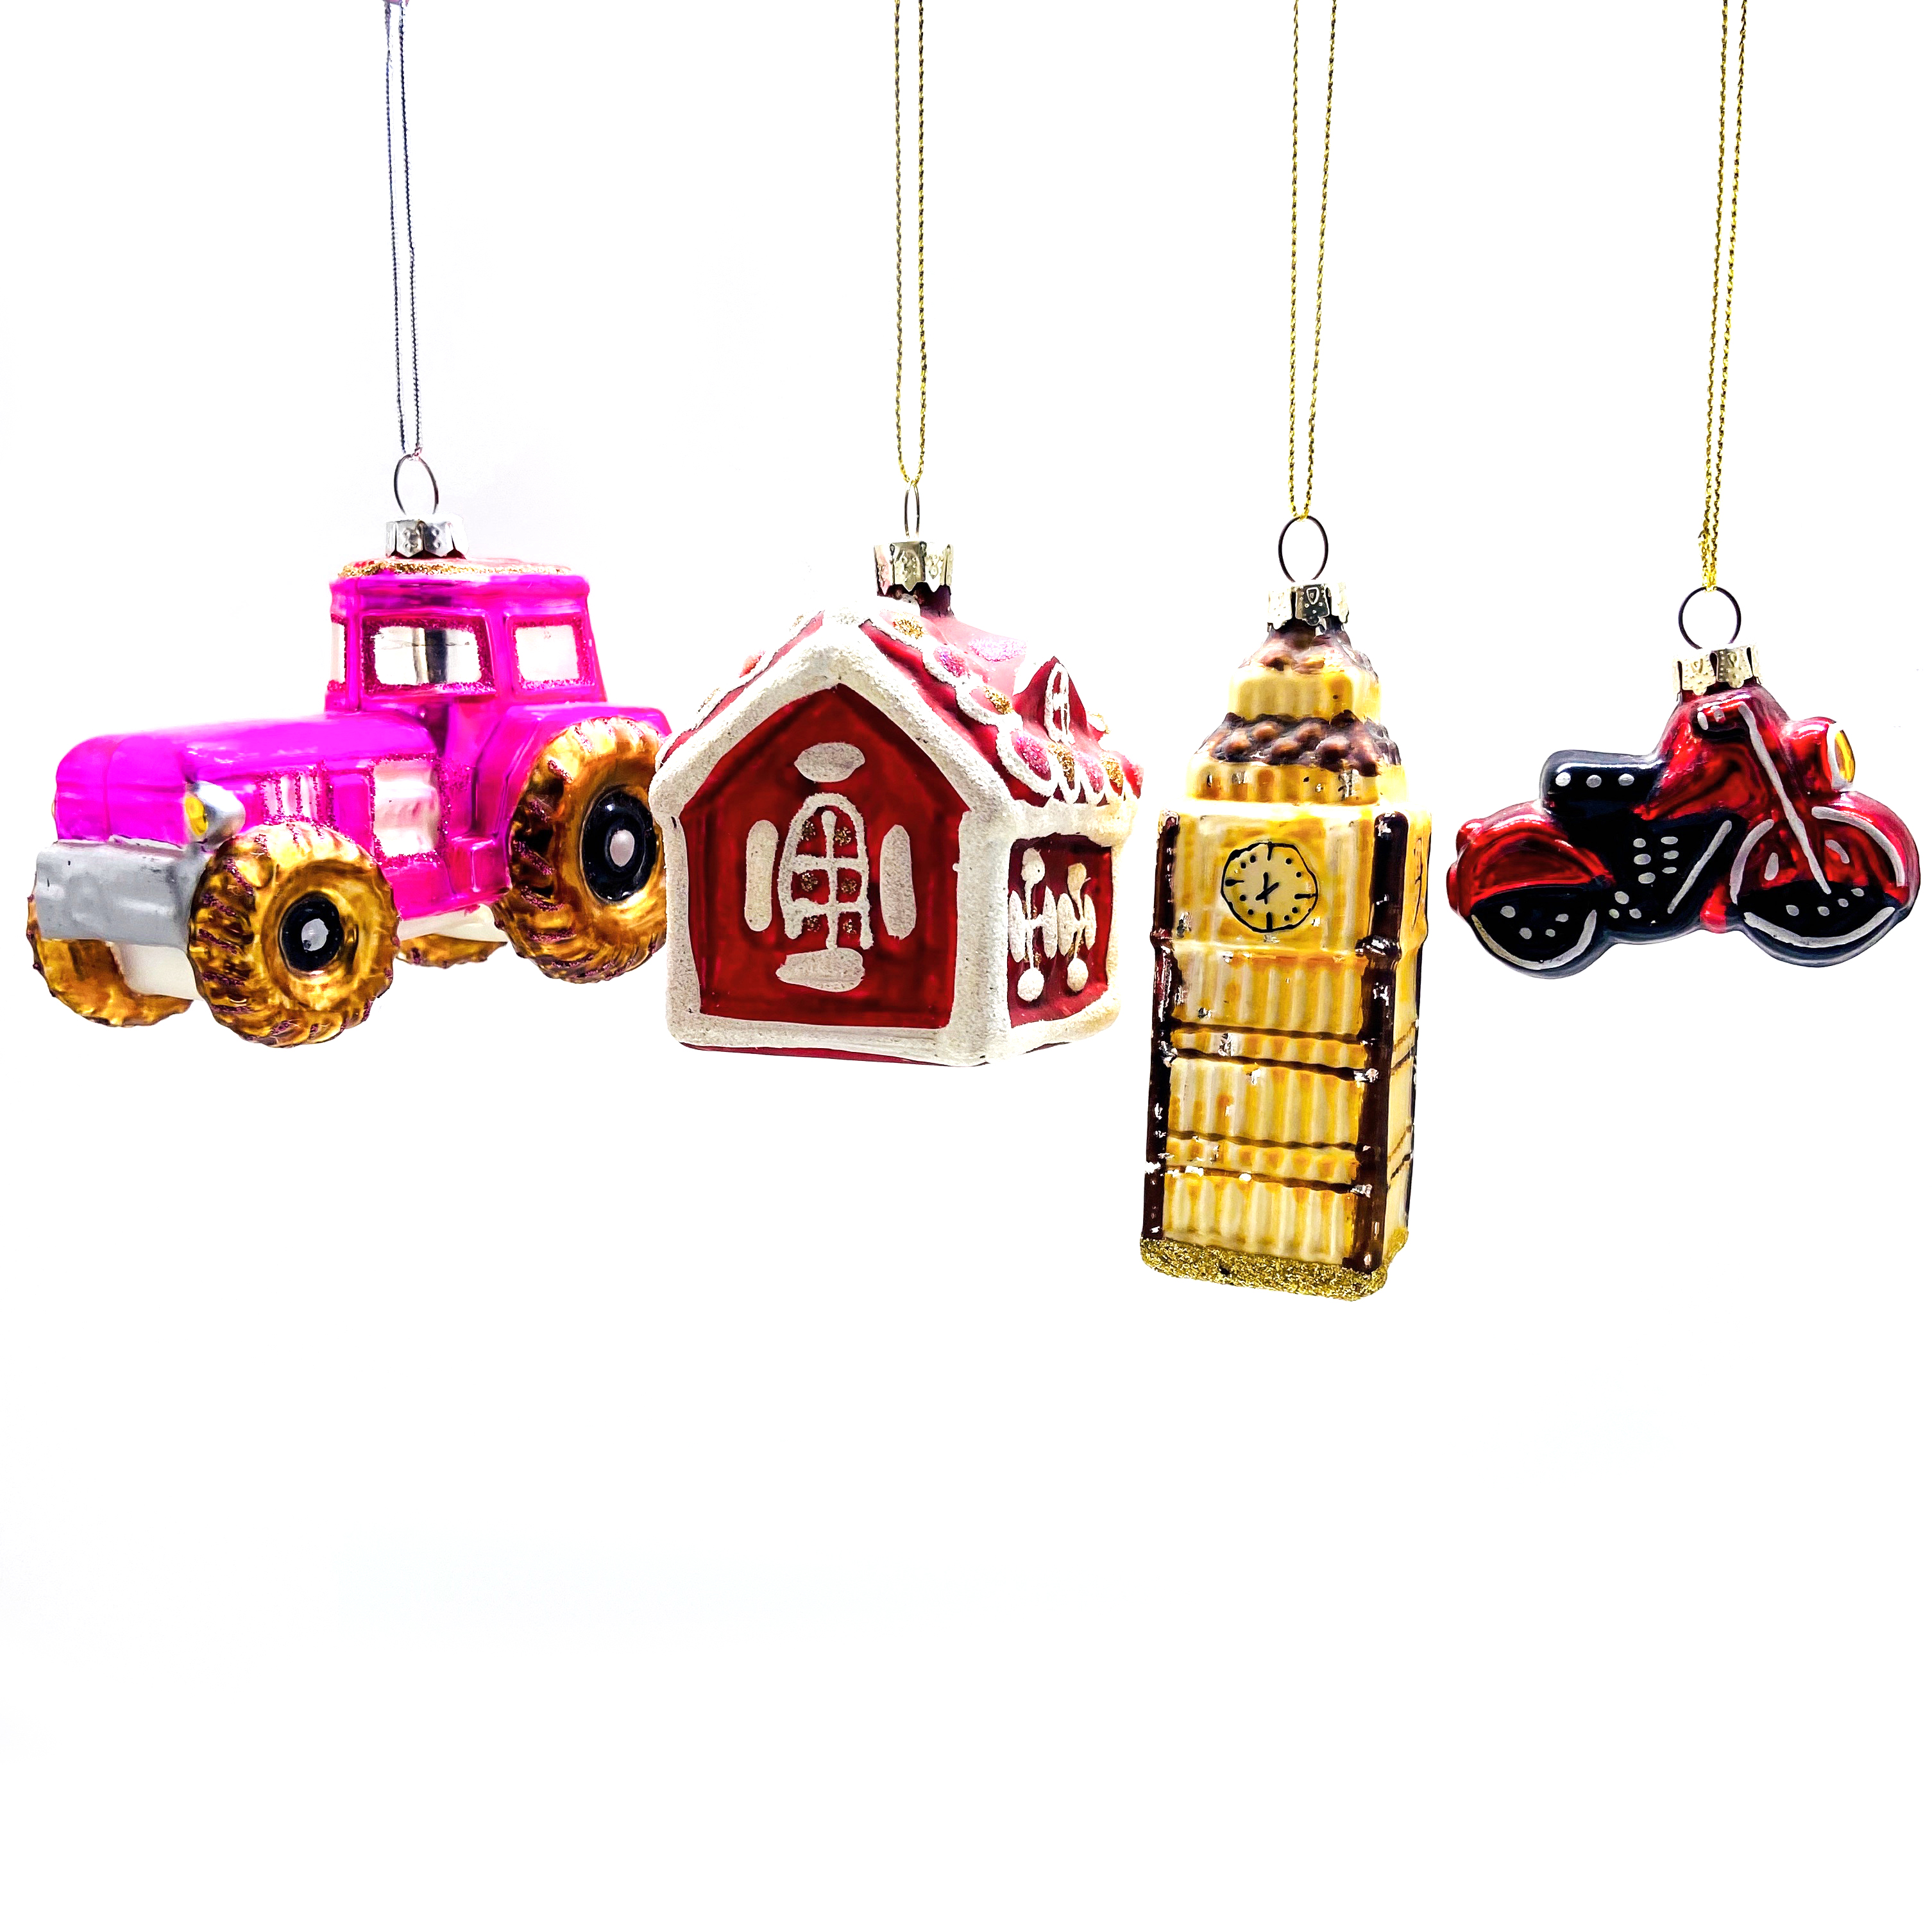 Glass House And Car Ornament Featured Image